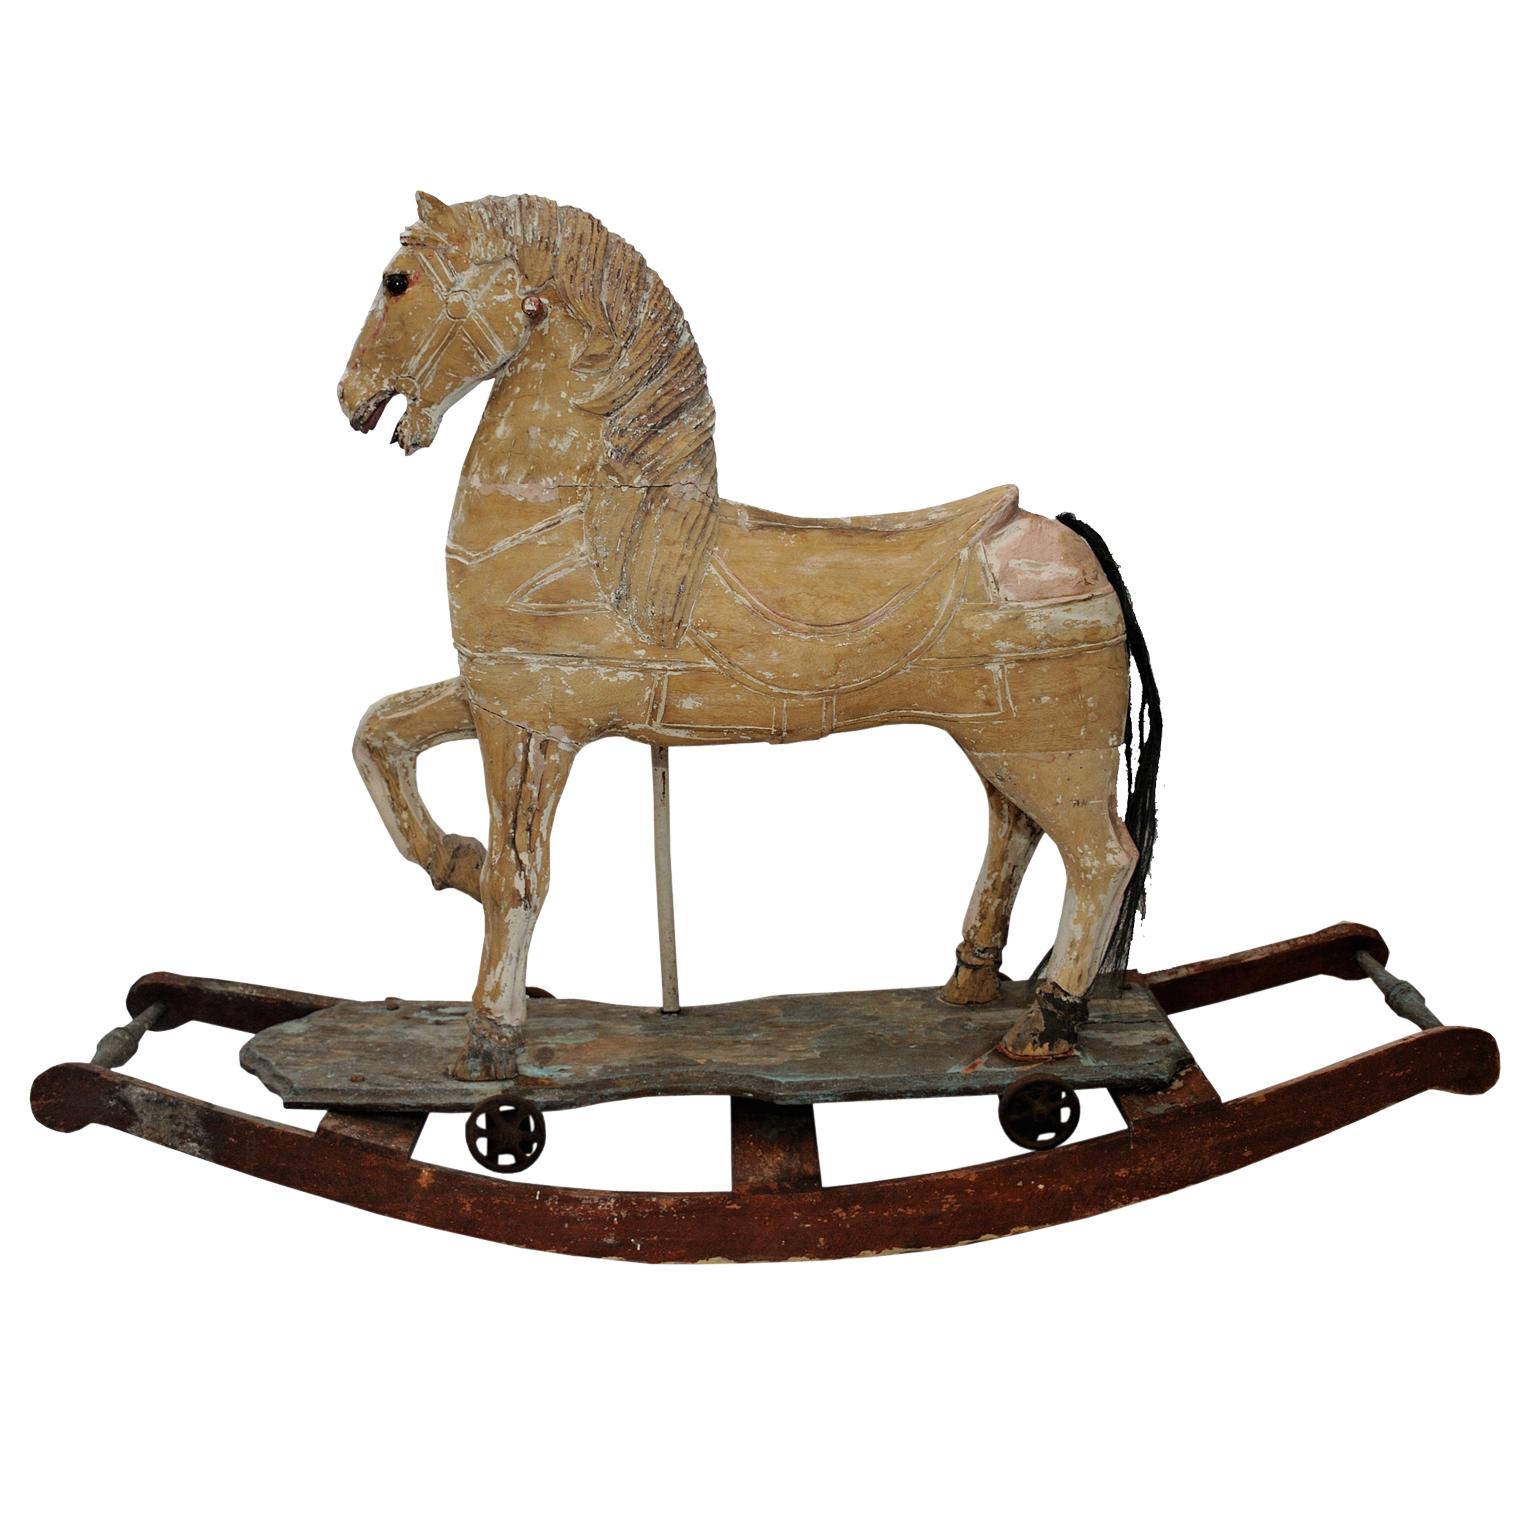 This is a really beautiful French mid 19th century decorative Rocking or Trolley Horse of great character, in its original worn antique condition. Wheeled horse would have been unbolted from rocking base, circa 1870.

 